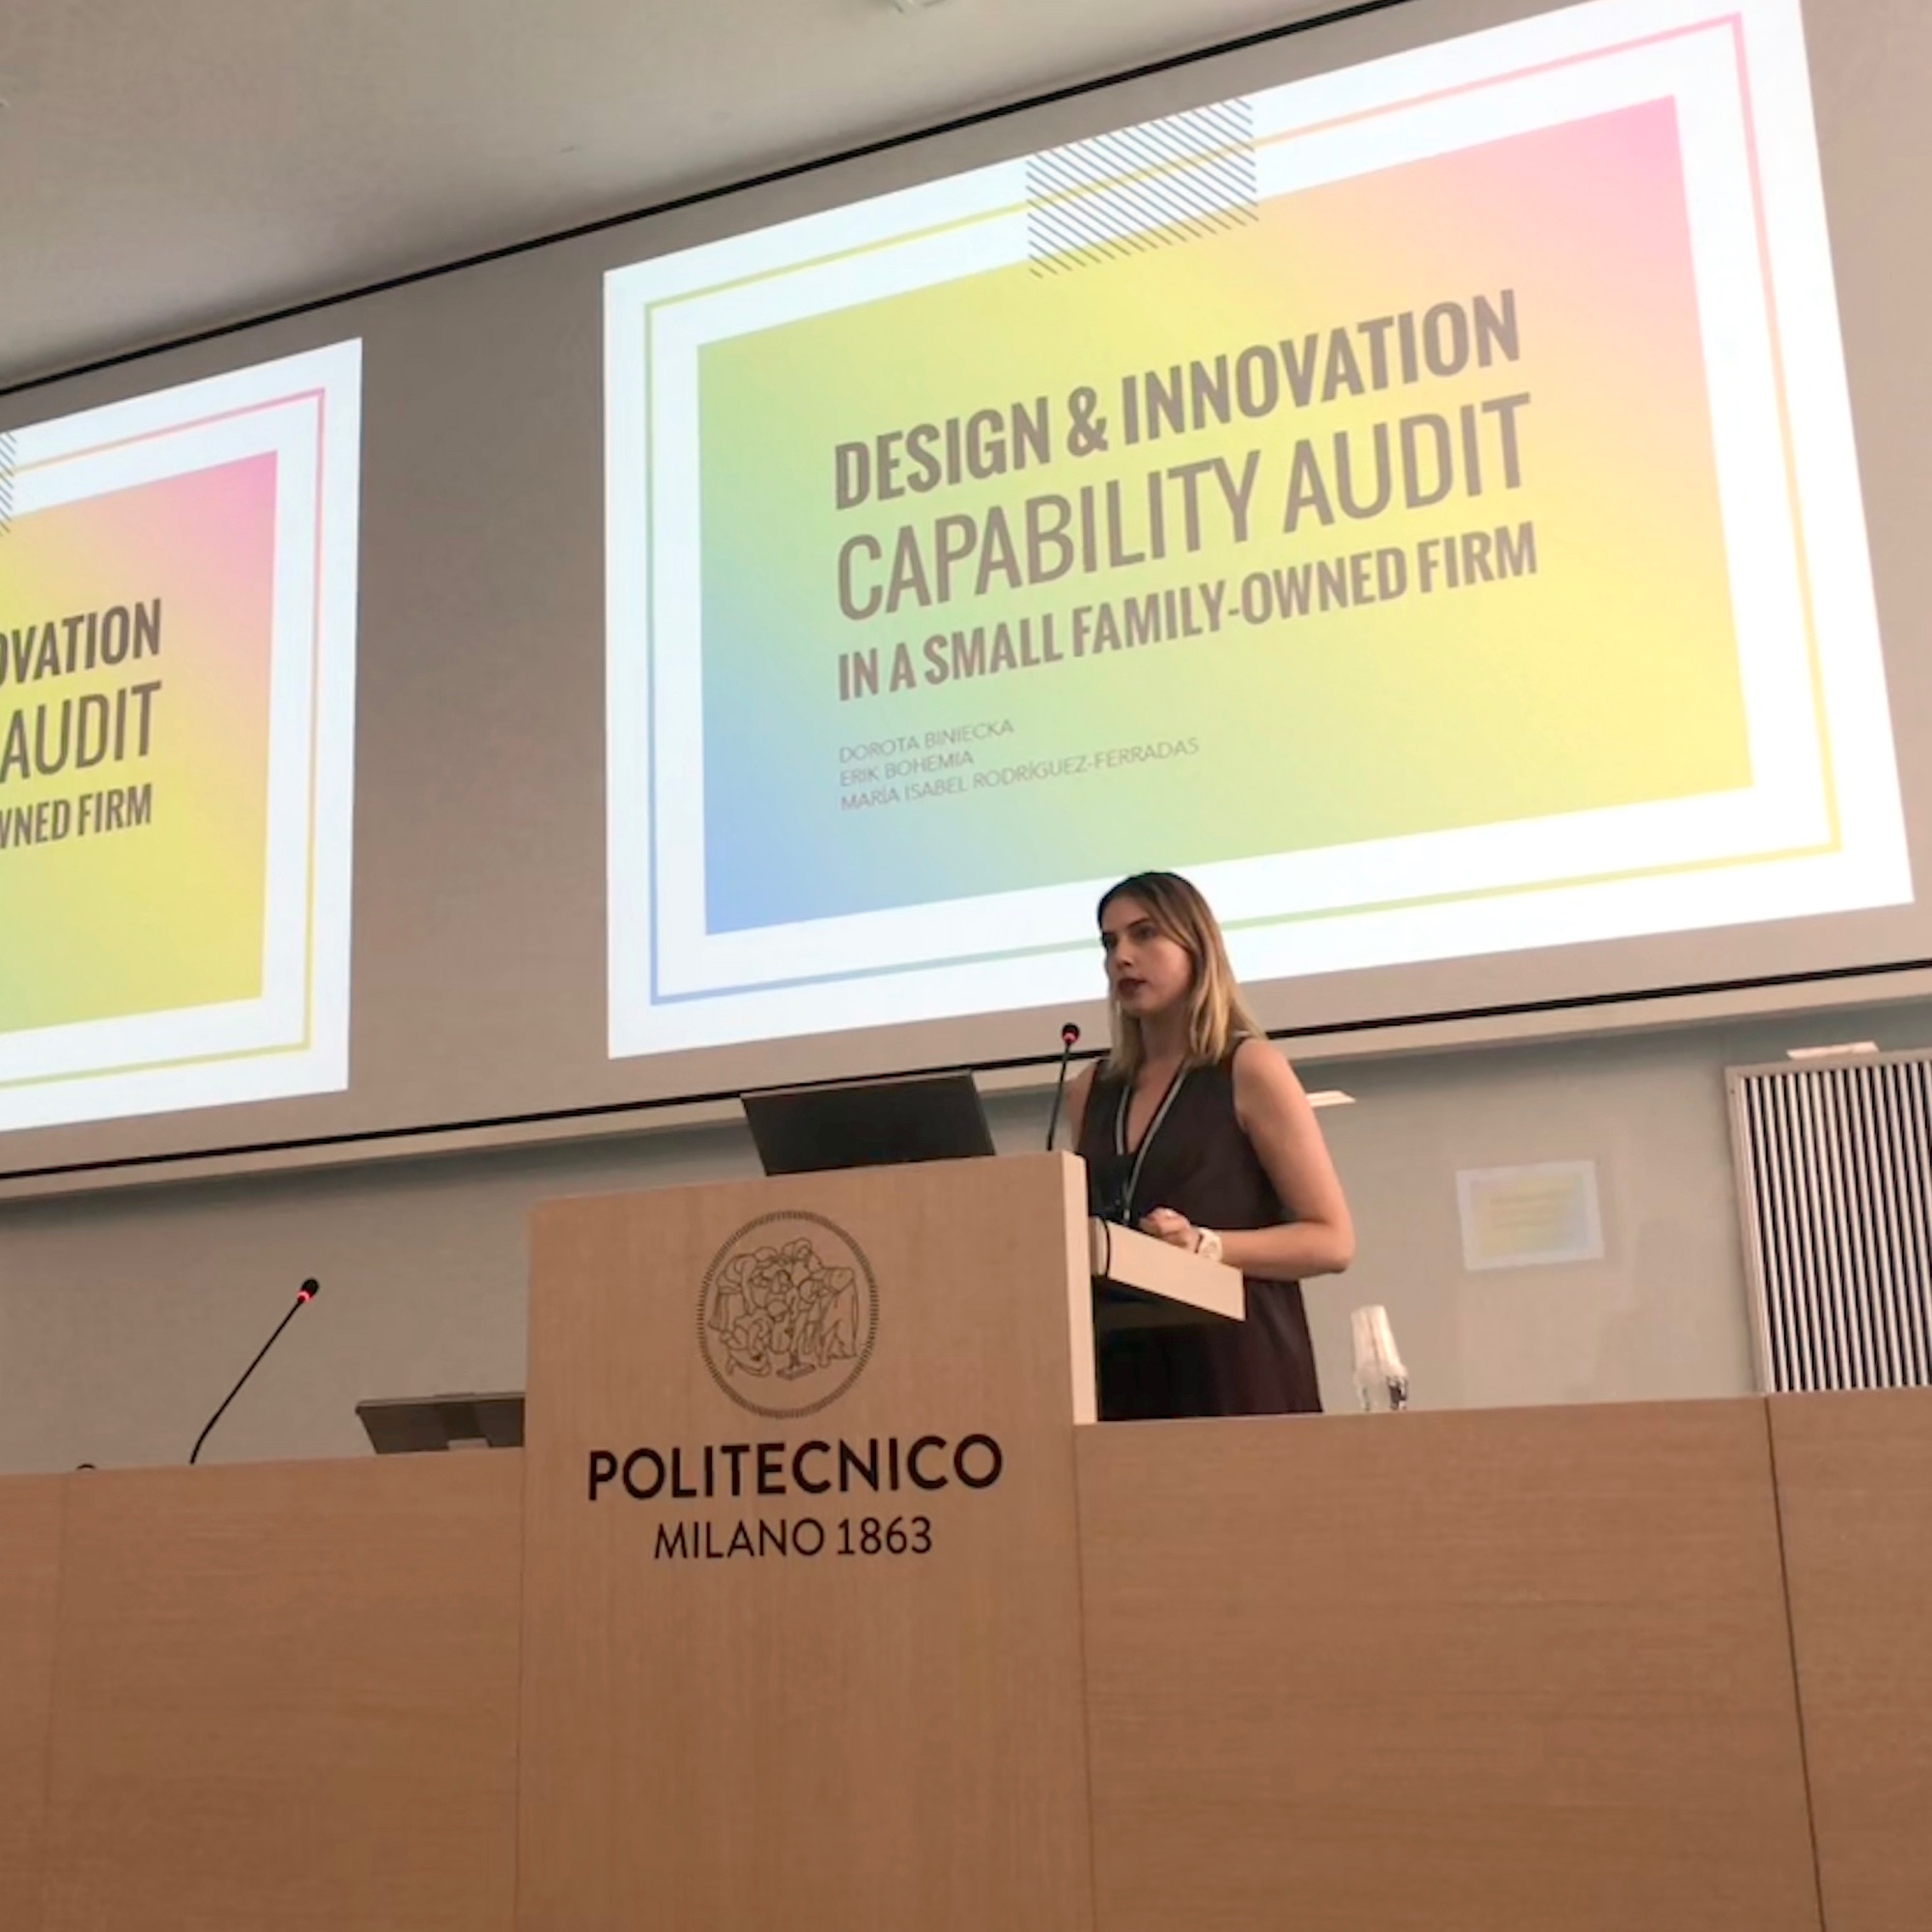 Design and Innovation Capability Audit  Presentation at R&D Management Conference at Politecnico di Milano in 2018